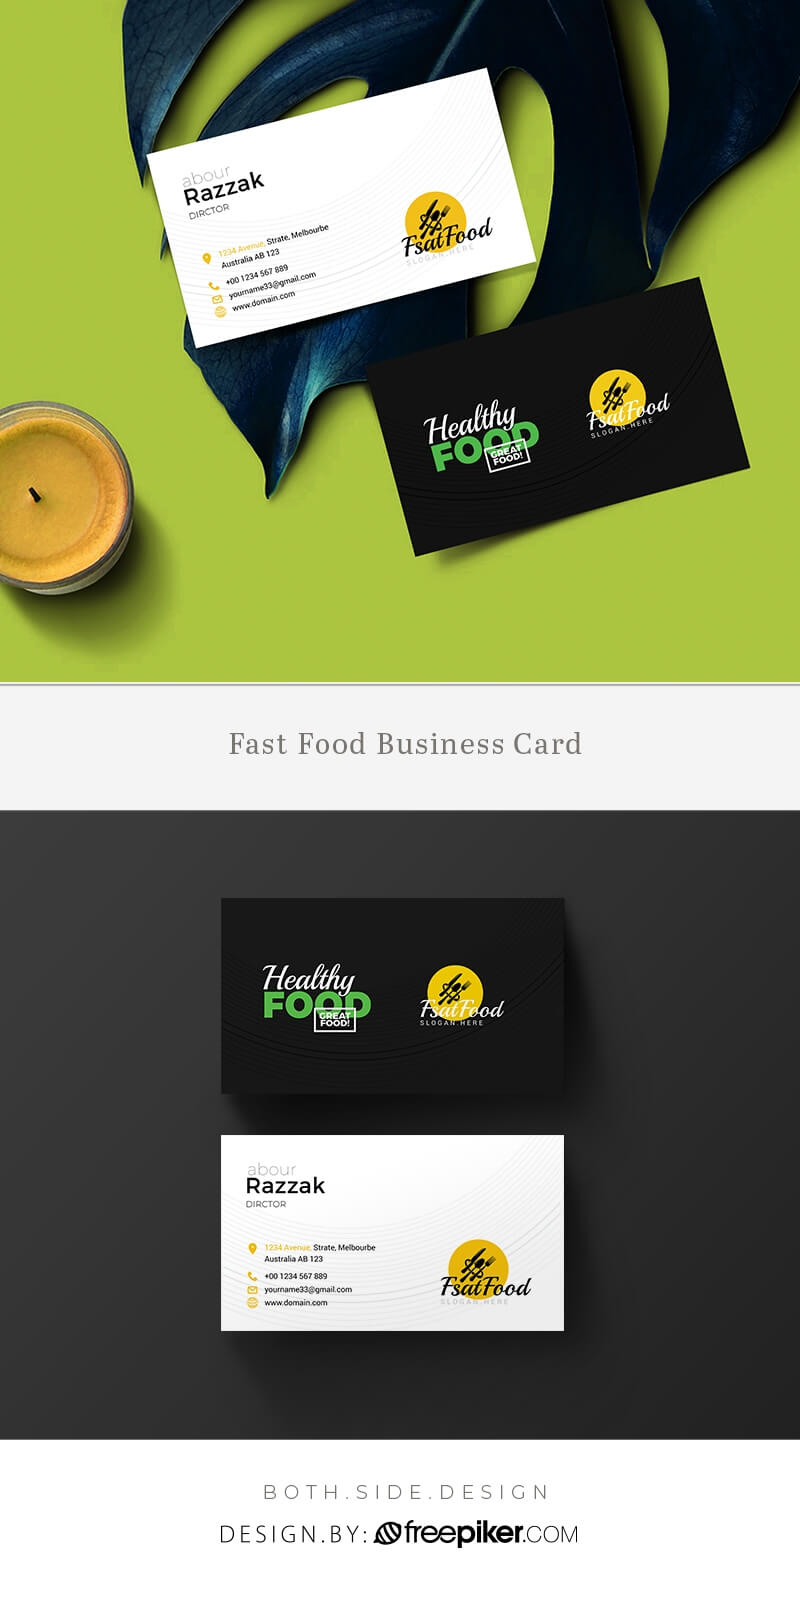 Freepiker | Food And Restaurant Business Card Template Pertaining To Restaurant Business Cards Templates Free